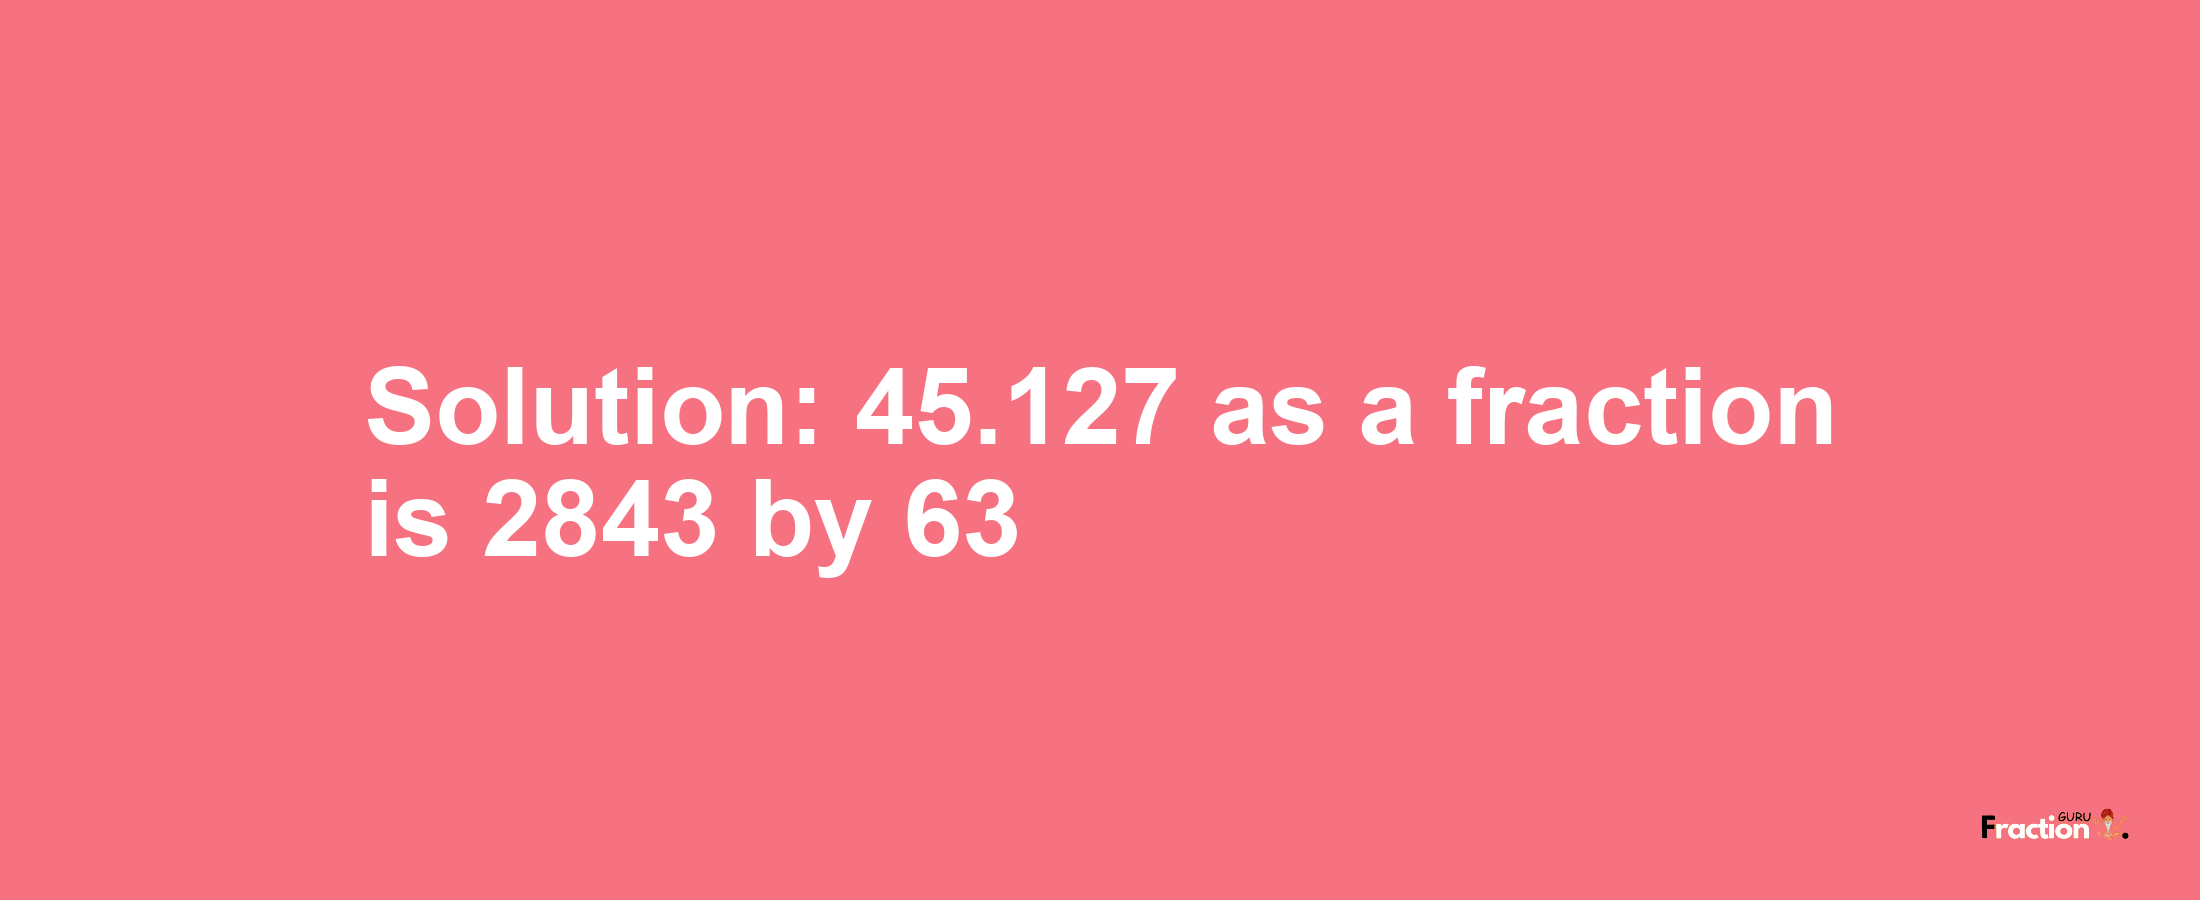 Solution:45.127 as a fraction is 2843/63